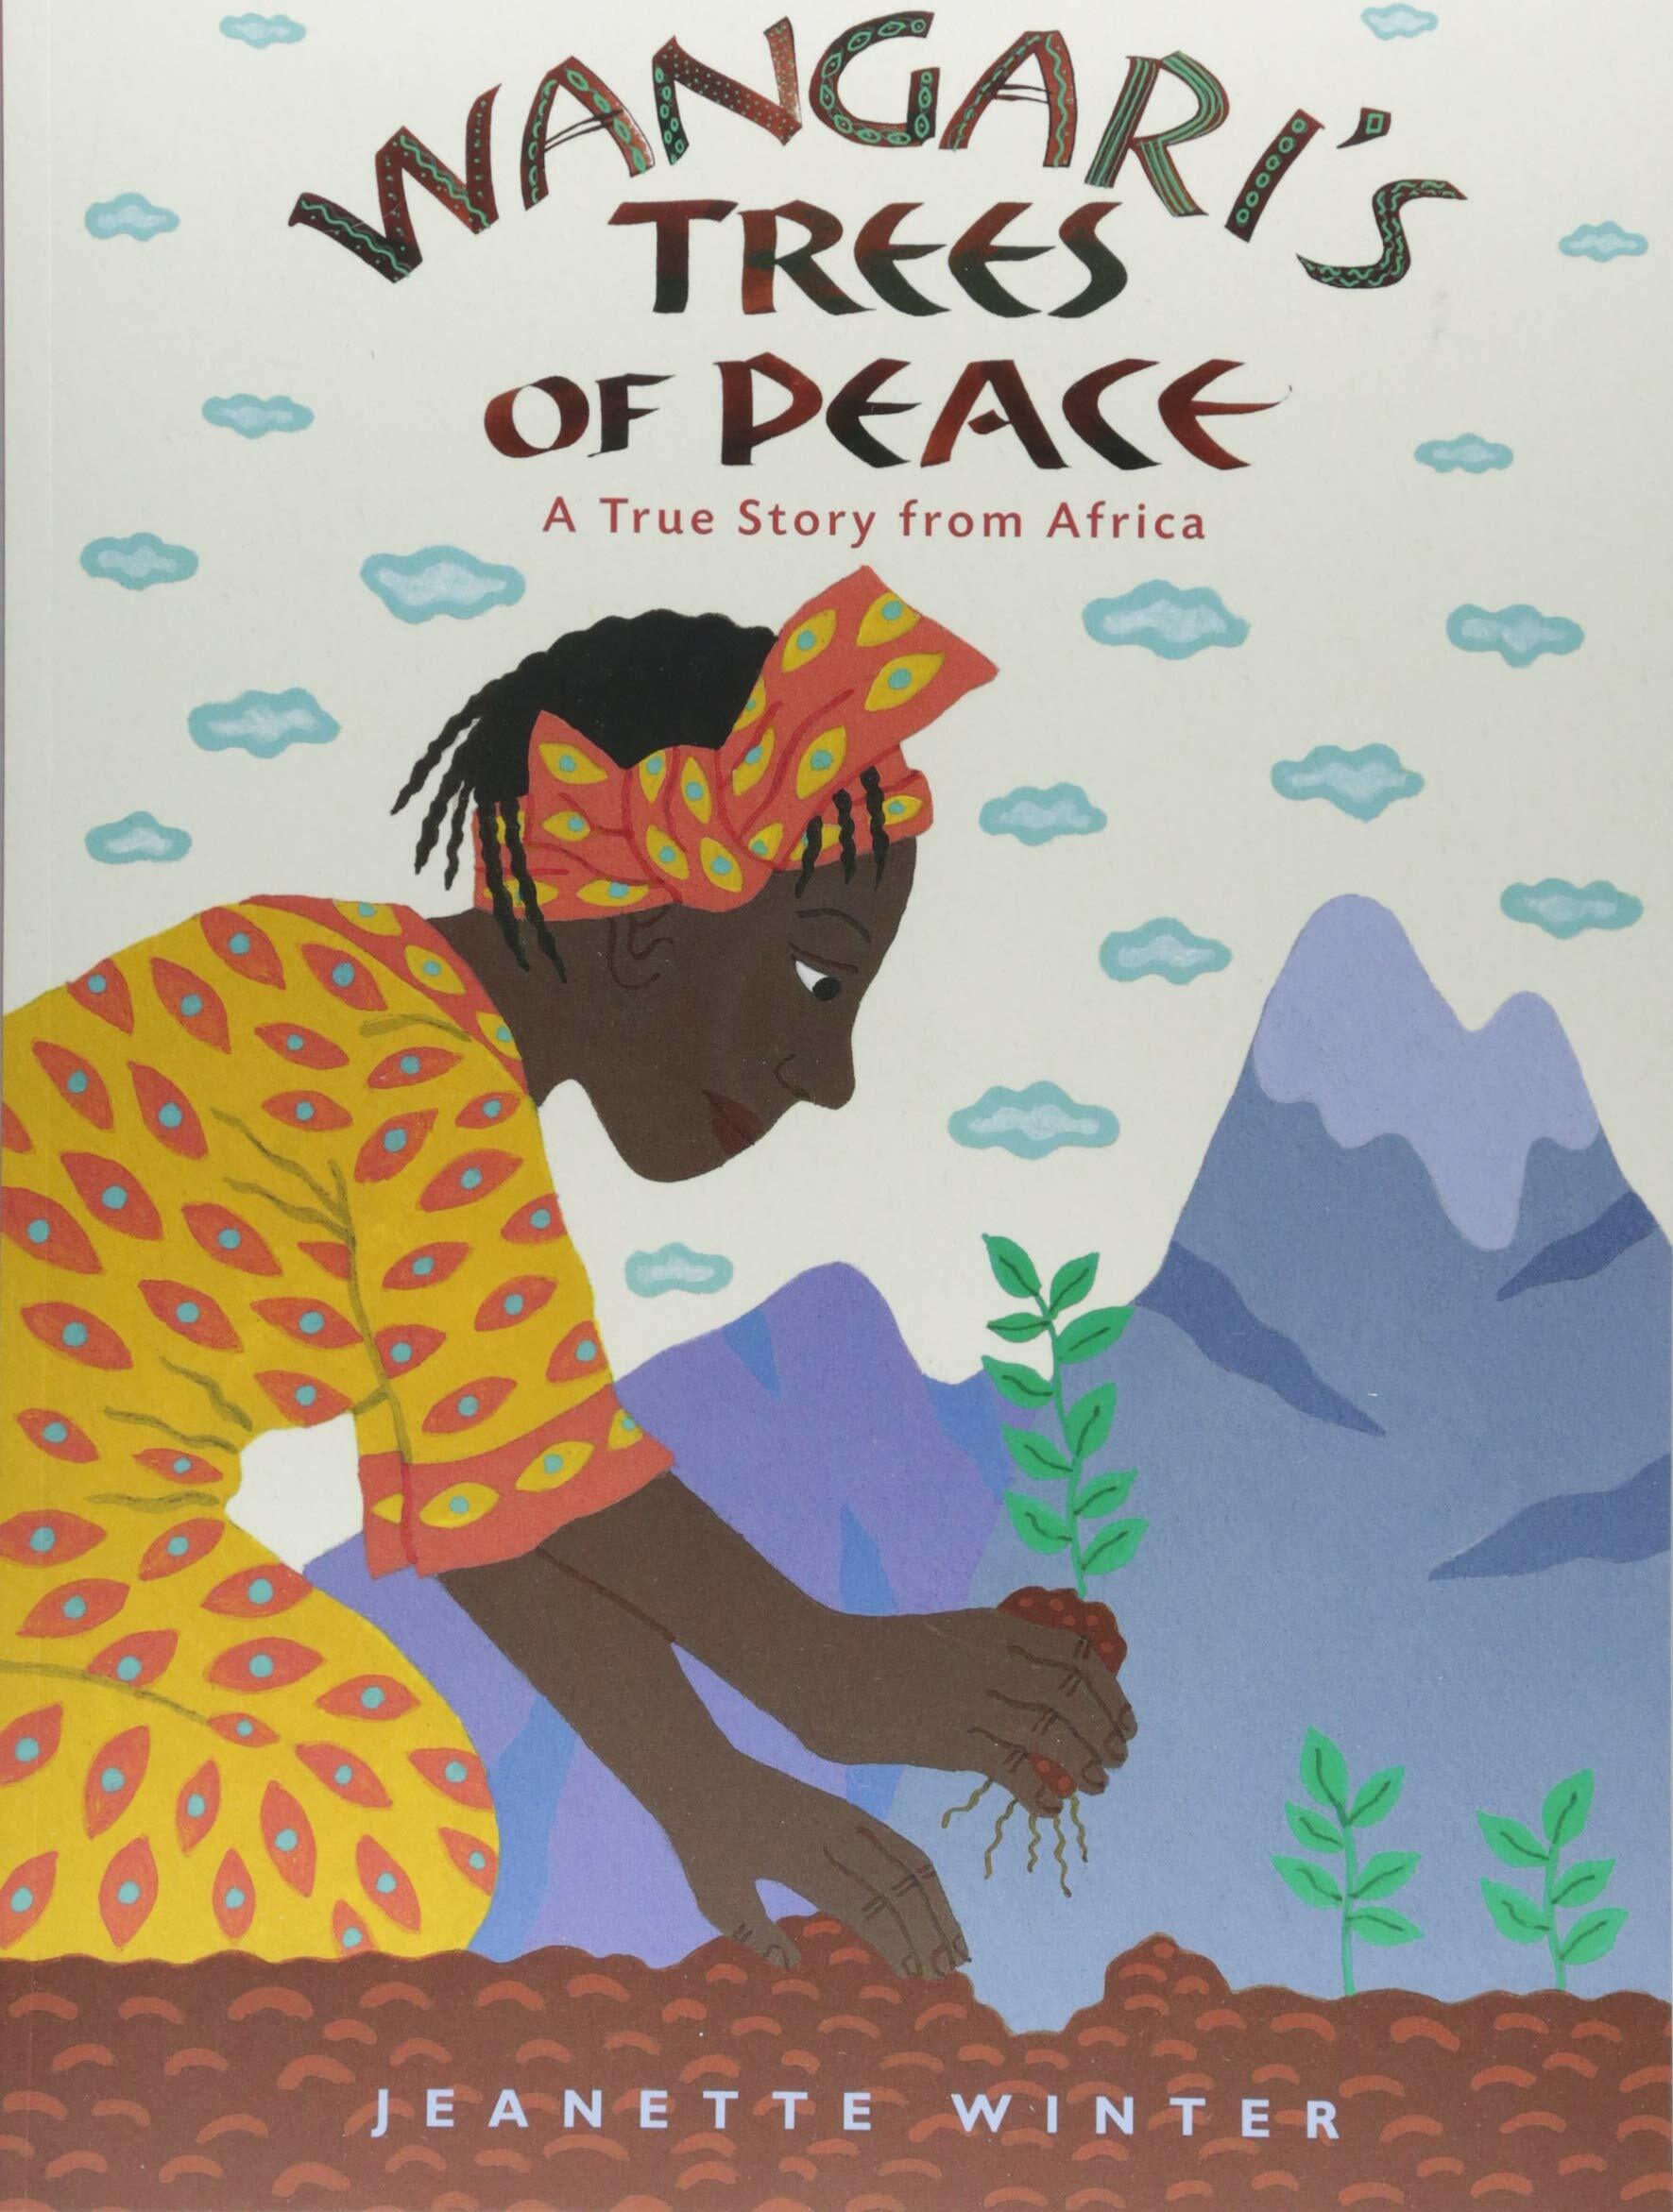 Wangaris Trees of Peace: A True Story from Africa (Paperback)